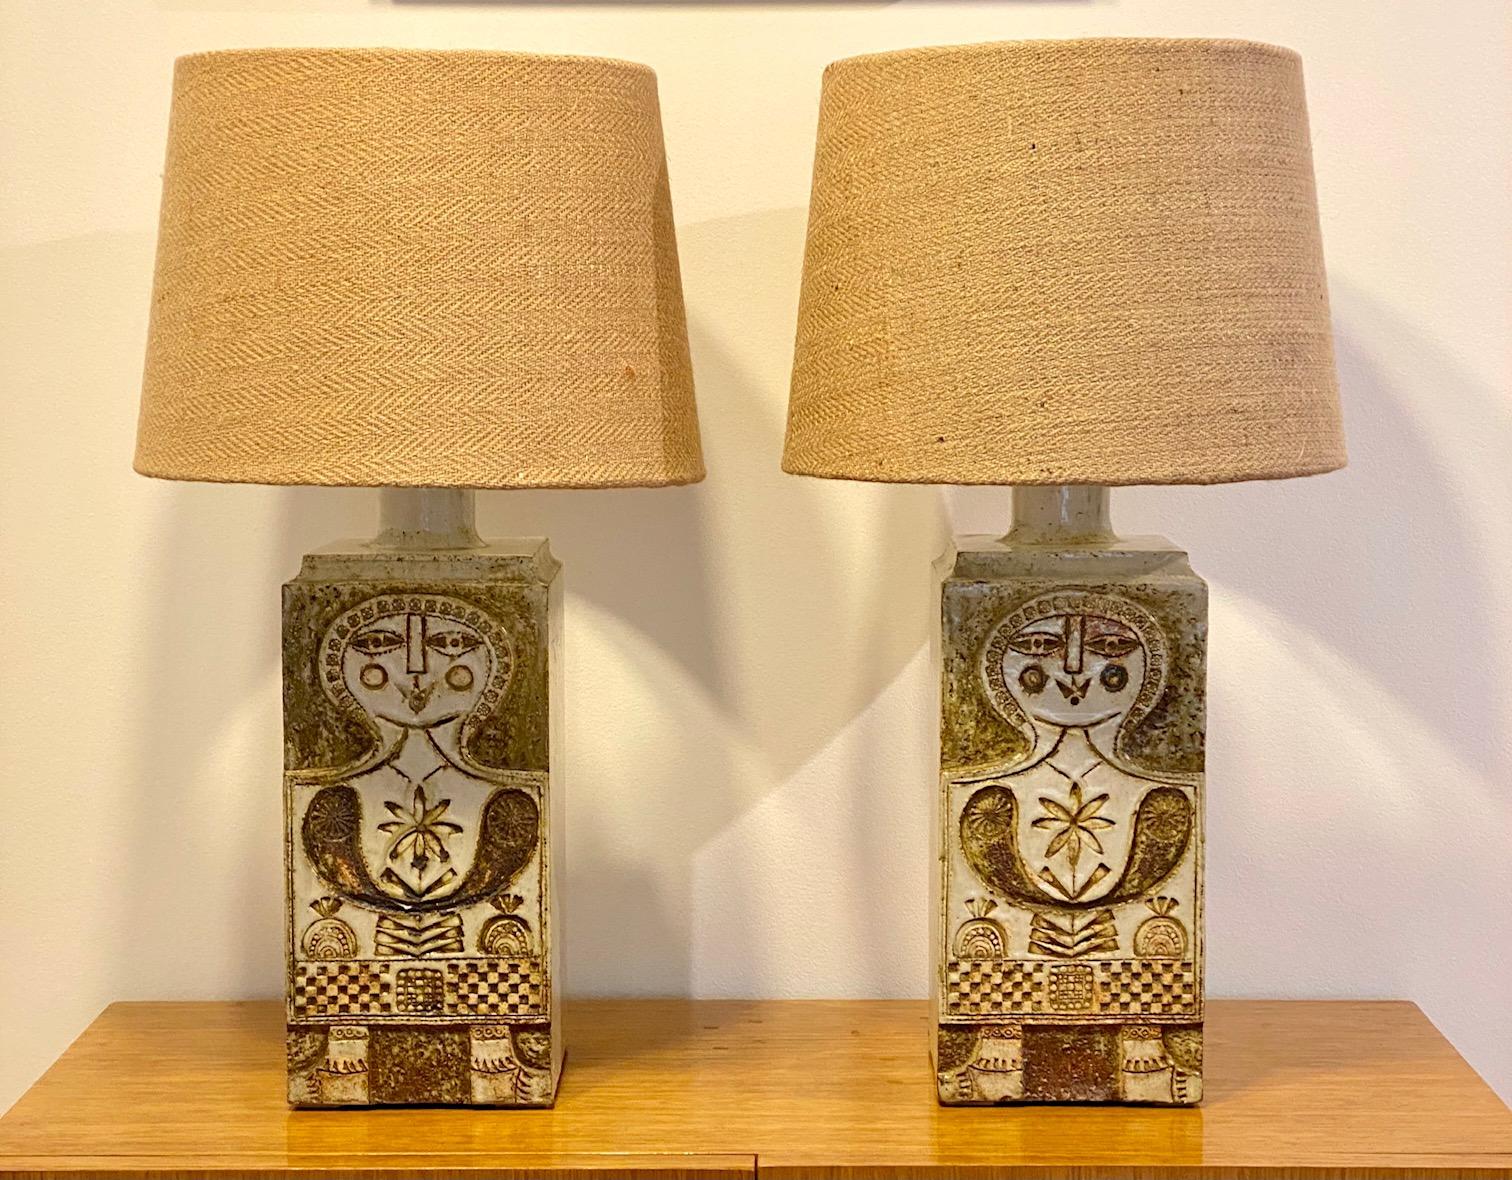 Roger Capron (1922-2006)
Pair of ceramic lamp bases with personnages
Manufactured circa 1960, signed Capron, Vallauris, France
Measure of ceramics solely: H 35 cm ( H 55 cm with shades) 
Note to international purchasers:
These lamps are wired